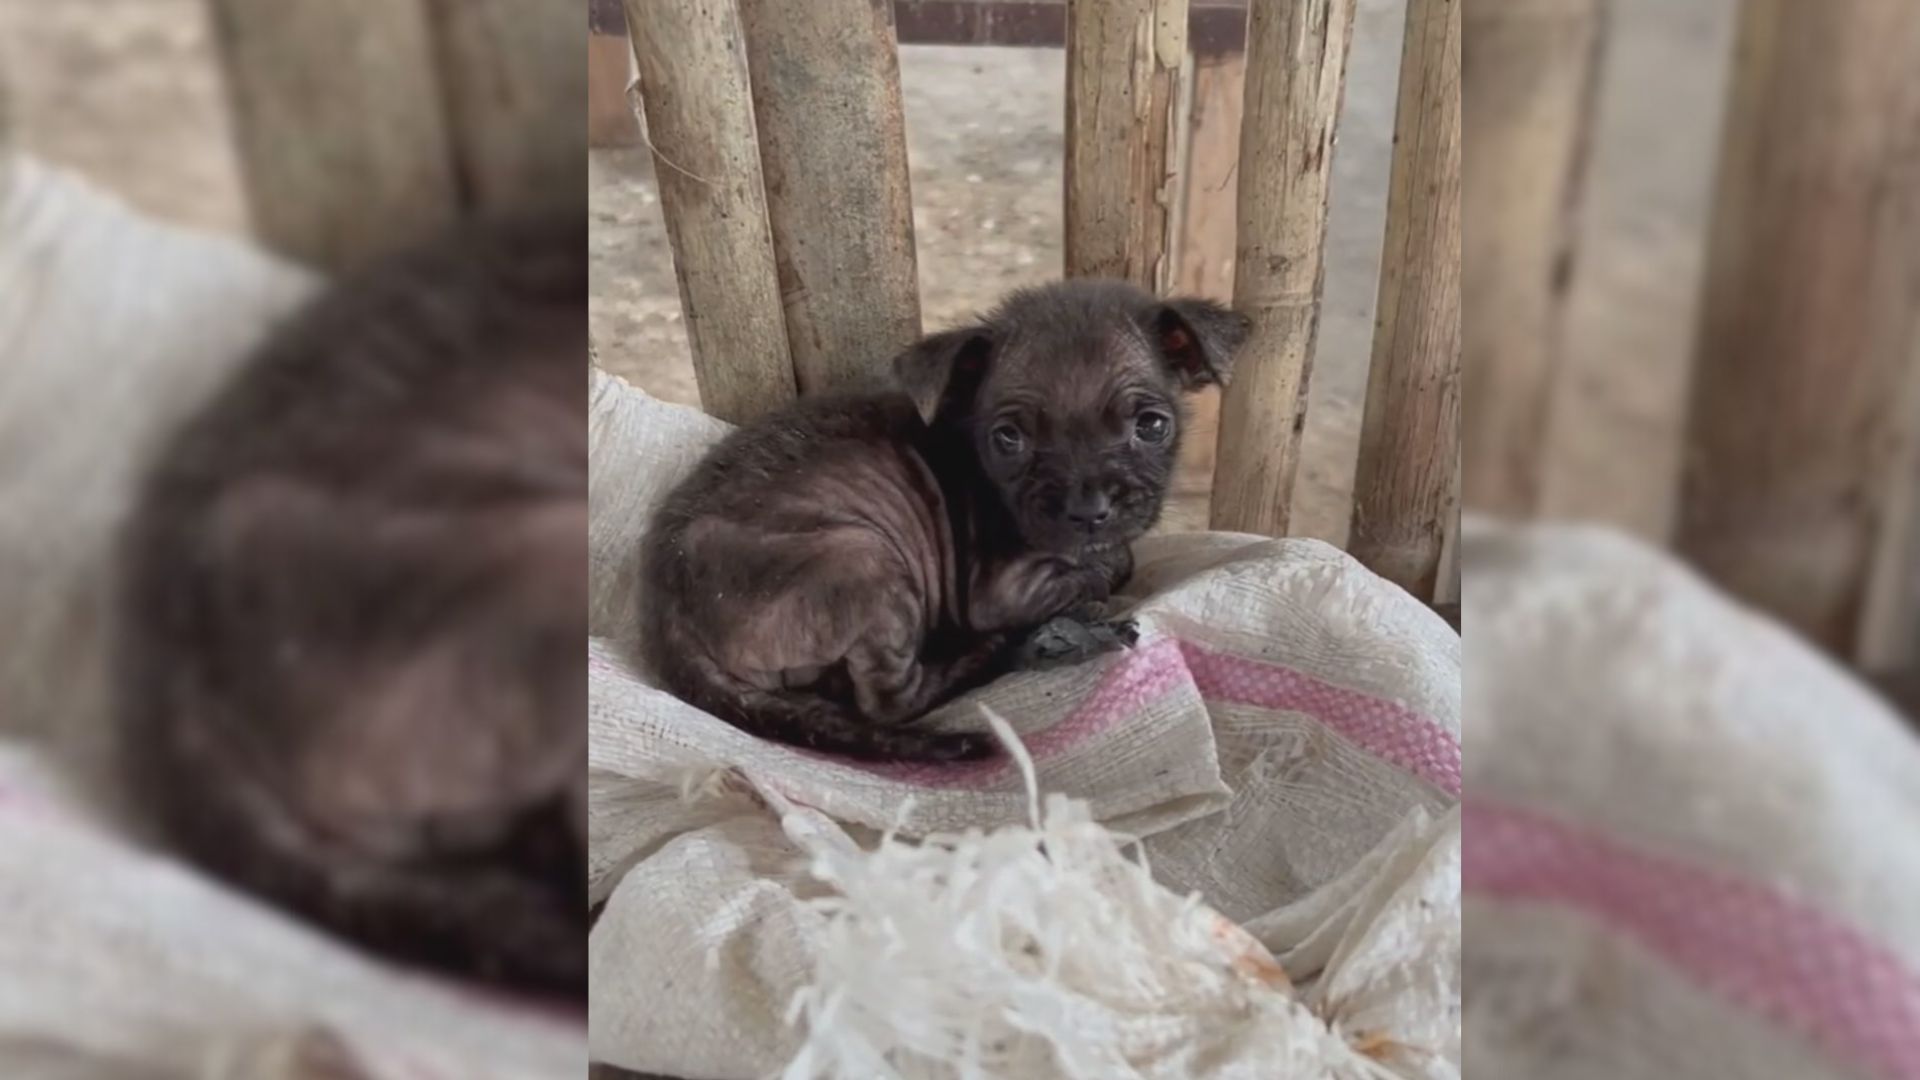 Puppy Was Dumped In A Rice Bag In The Trash But Then His Luck Quickly Changed For The Better